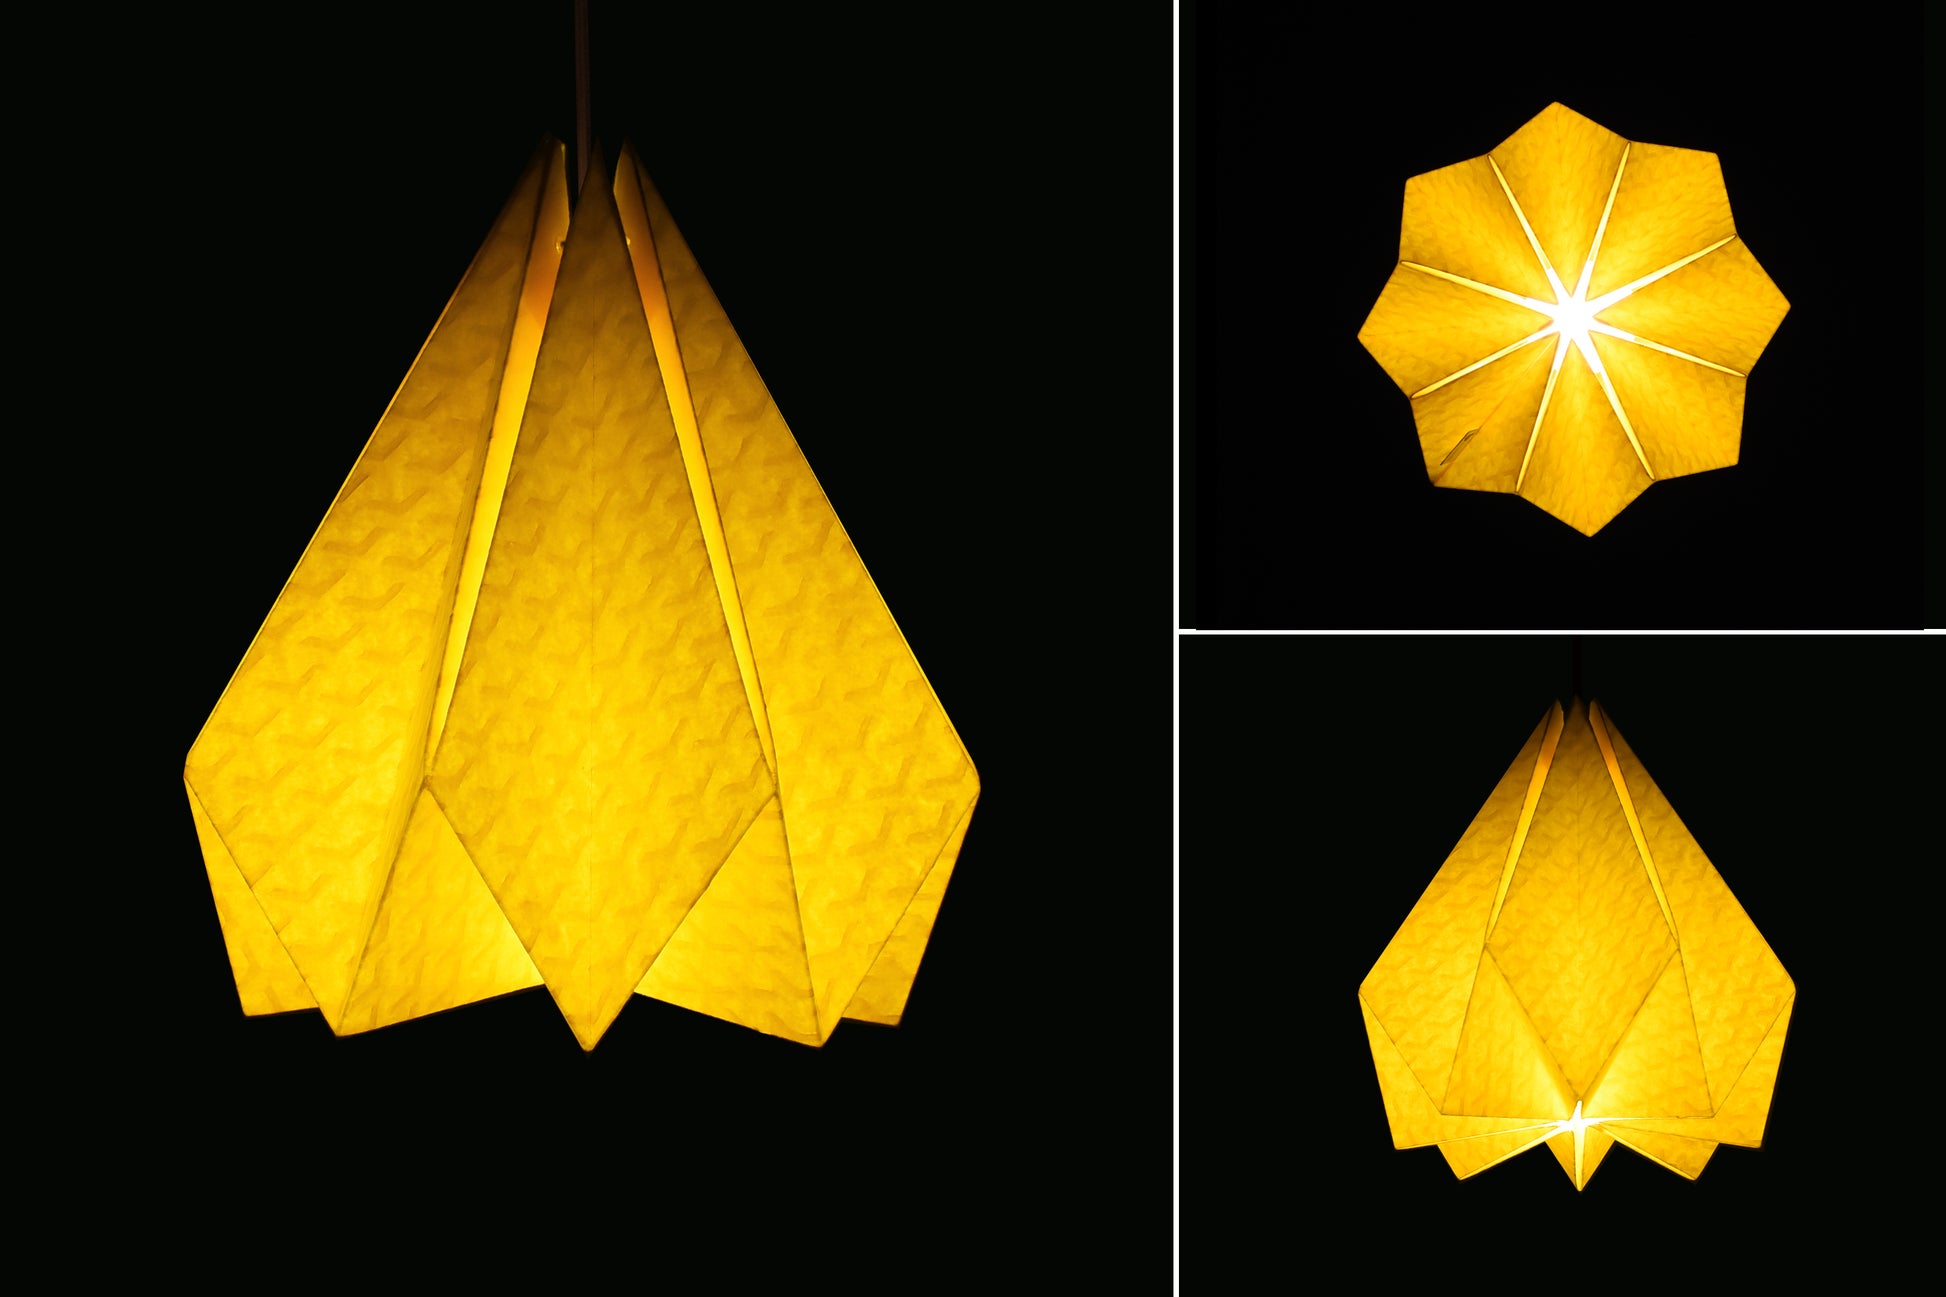 Design Paper Lampshade for Architects and Designers